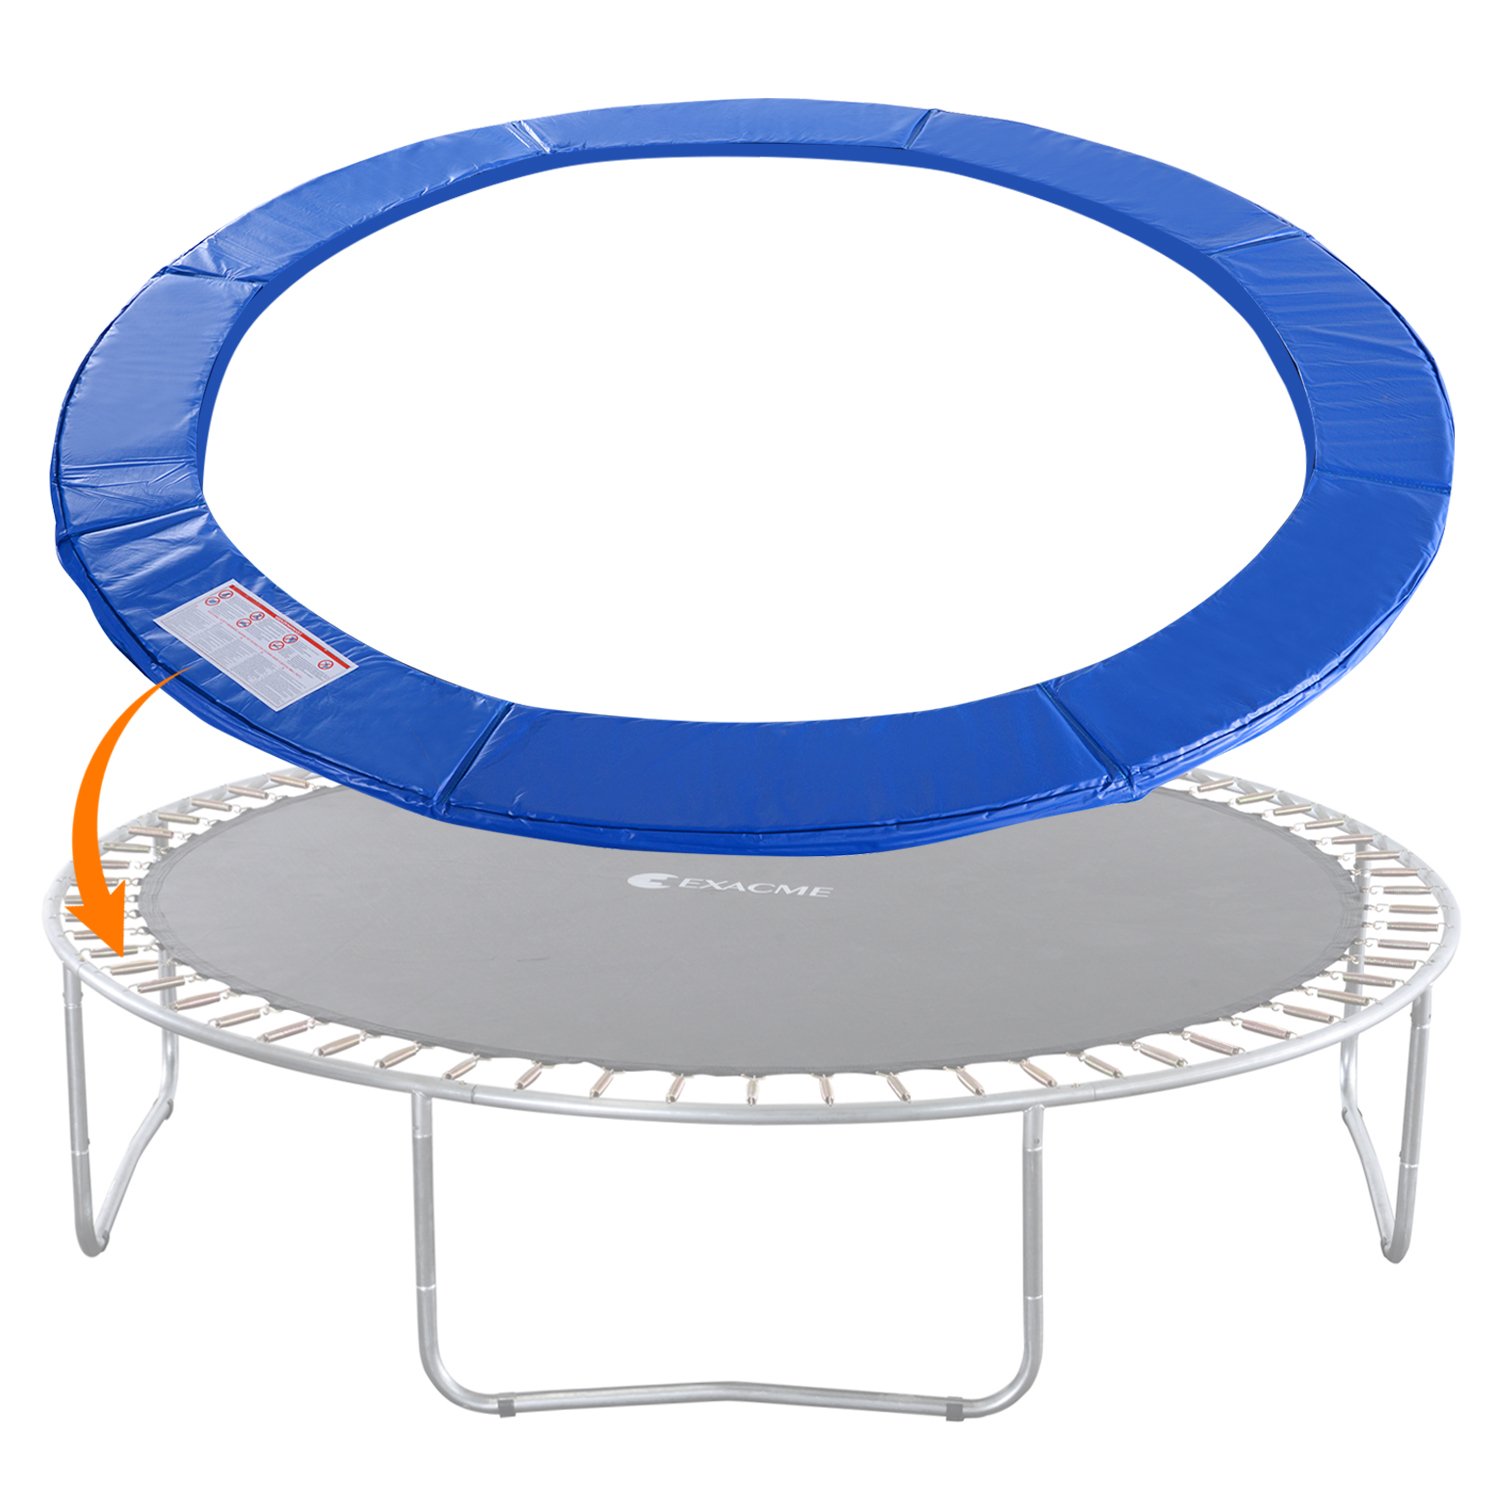 Exacme 14 Foot Round Trampoline Frame Spring Cover Safety Pad, Blue (Open Box) 8161170204499 eBay